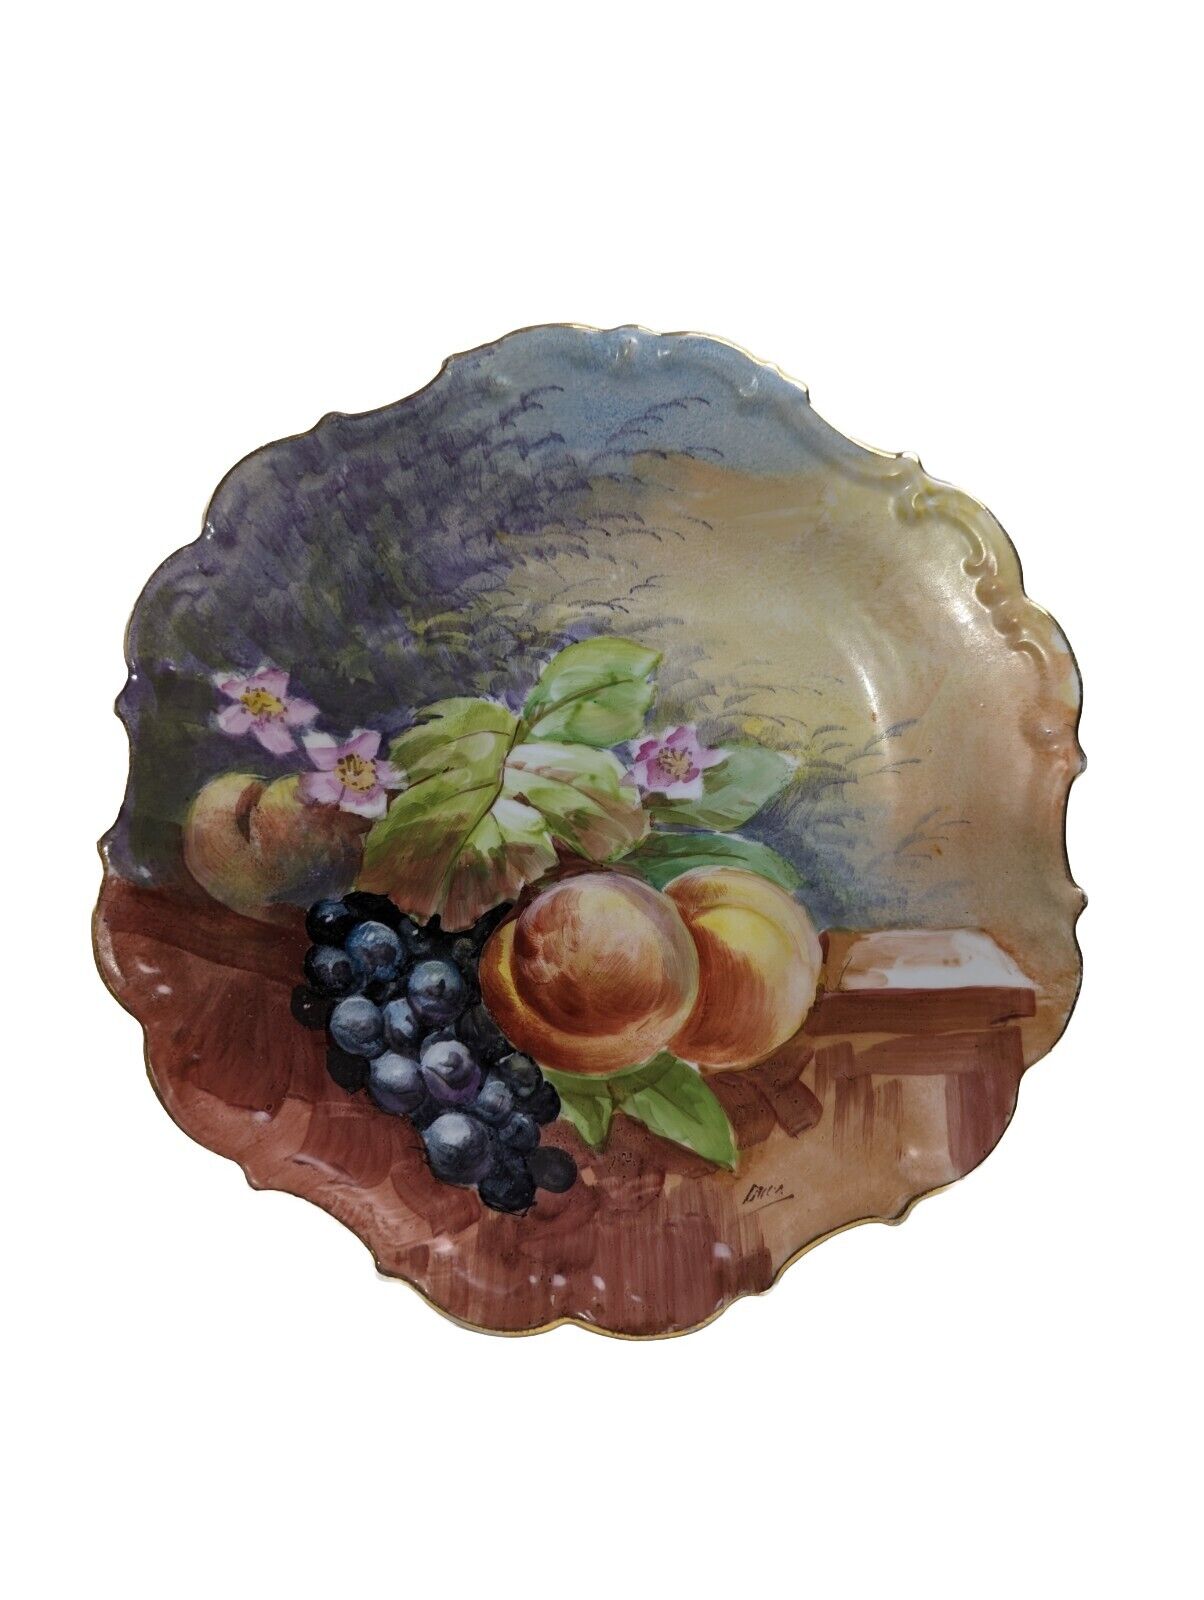 Vintage Limoges France Hand Painted Plate Signed Fruit Peaches Grapes